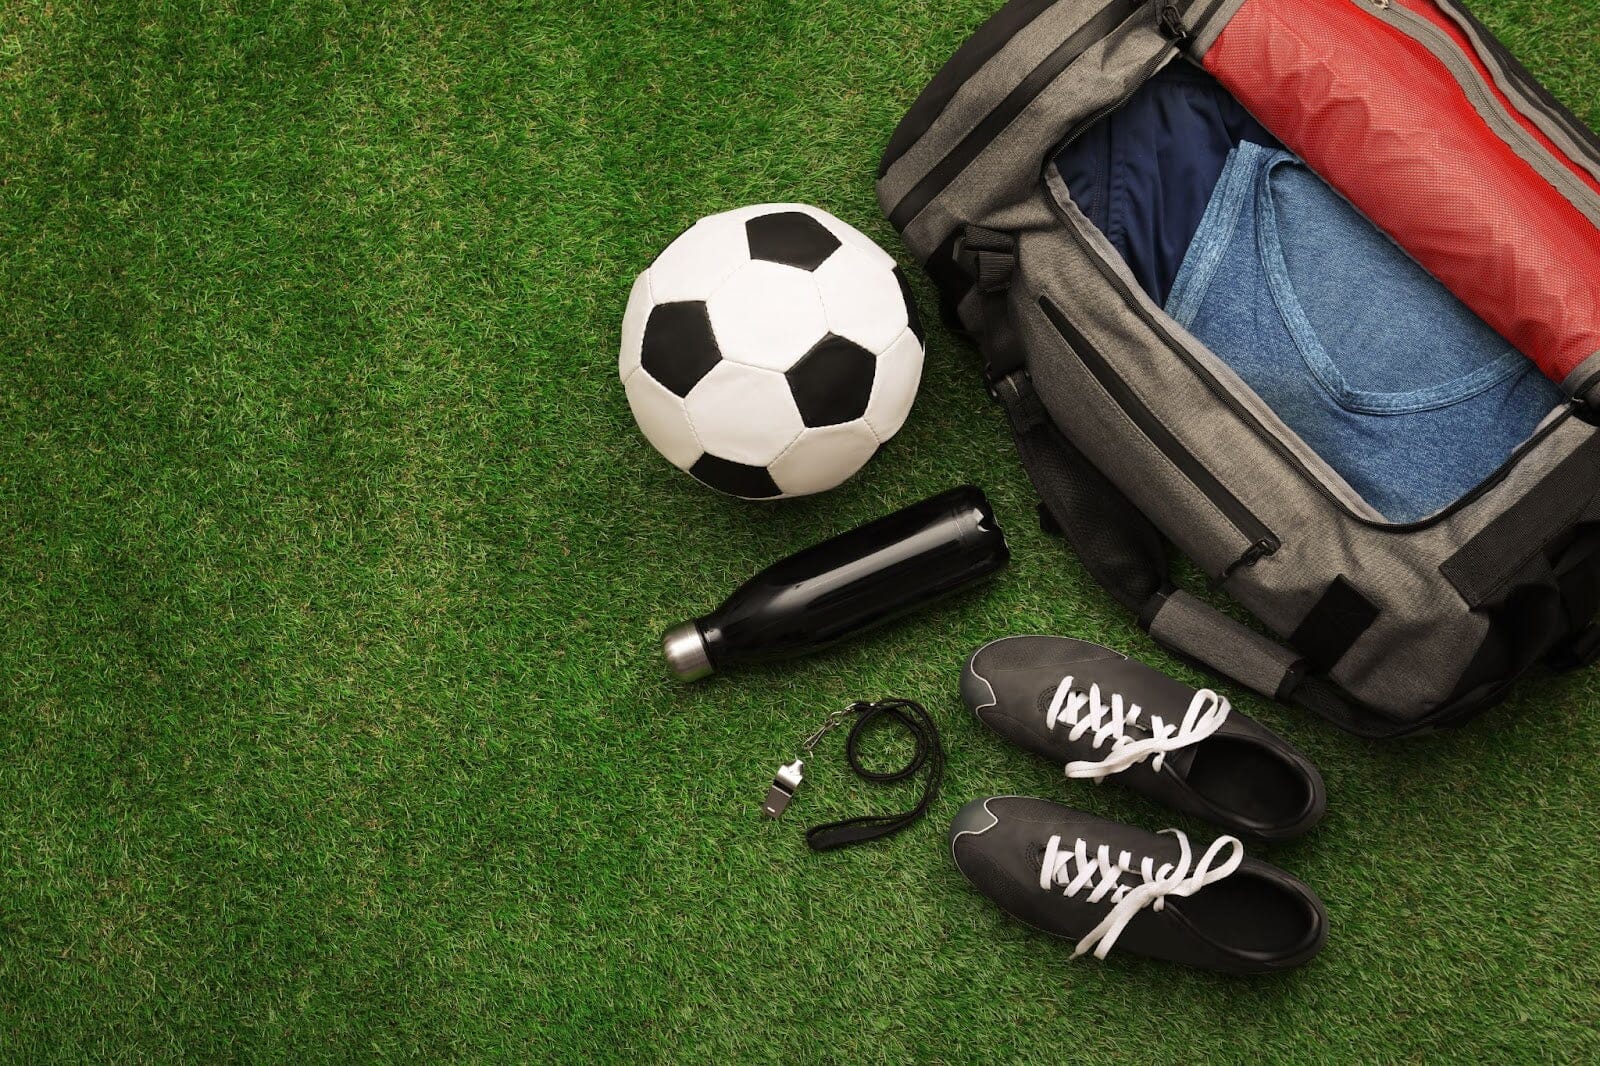 From Amateur to Pro: Essential Soccer Equipment for Every Level